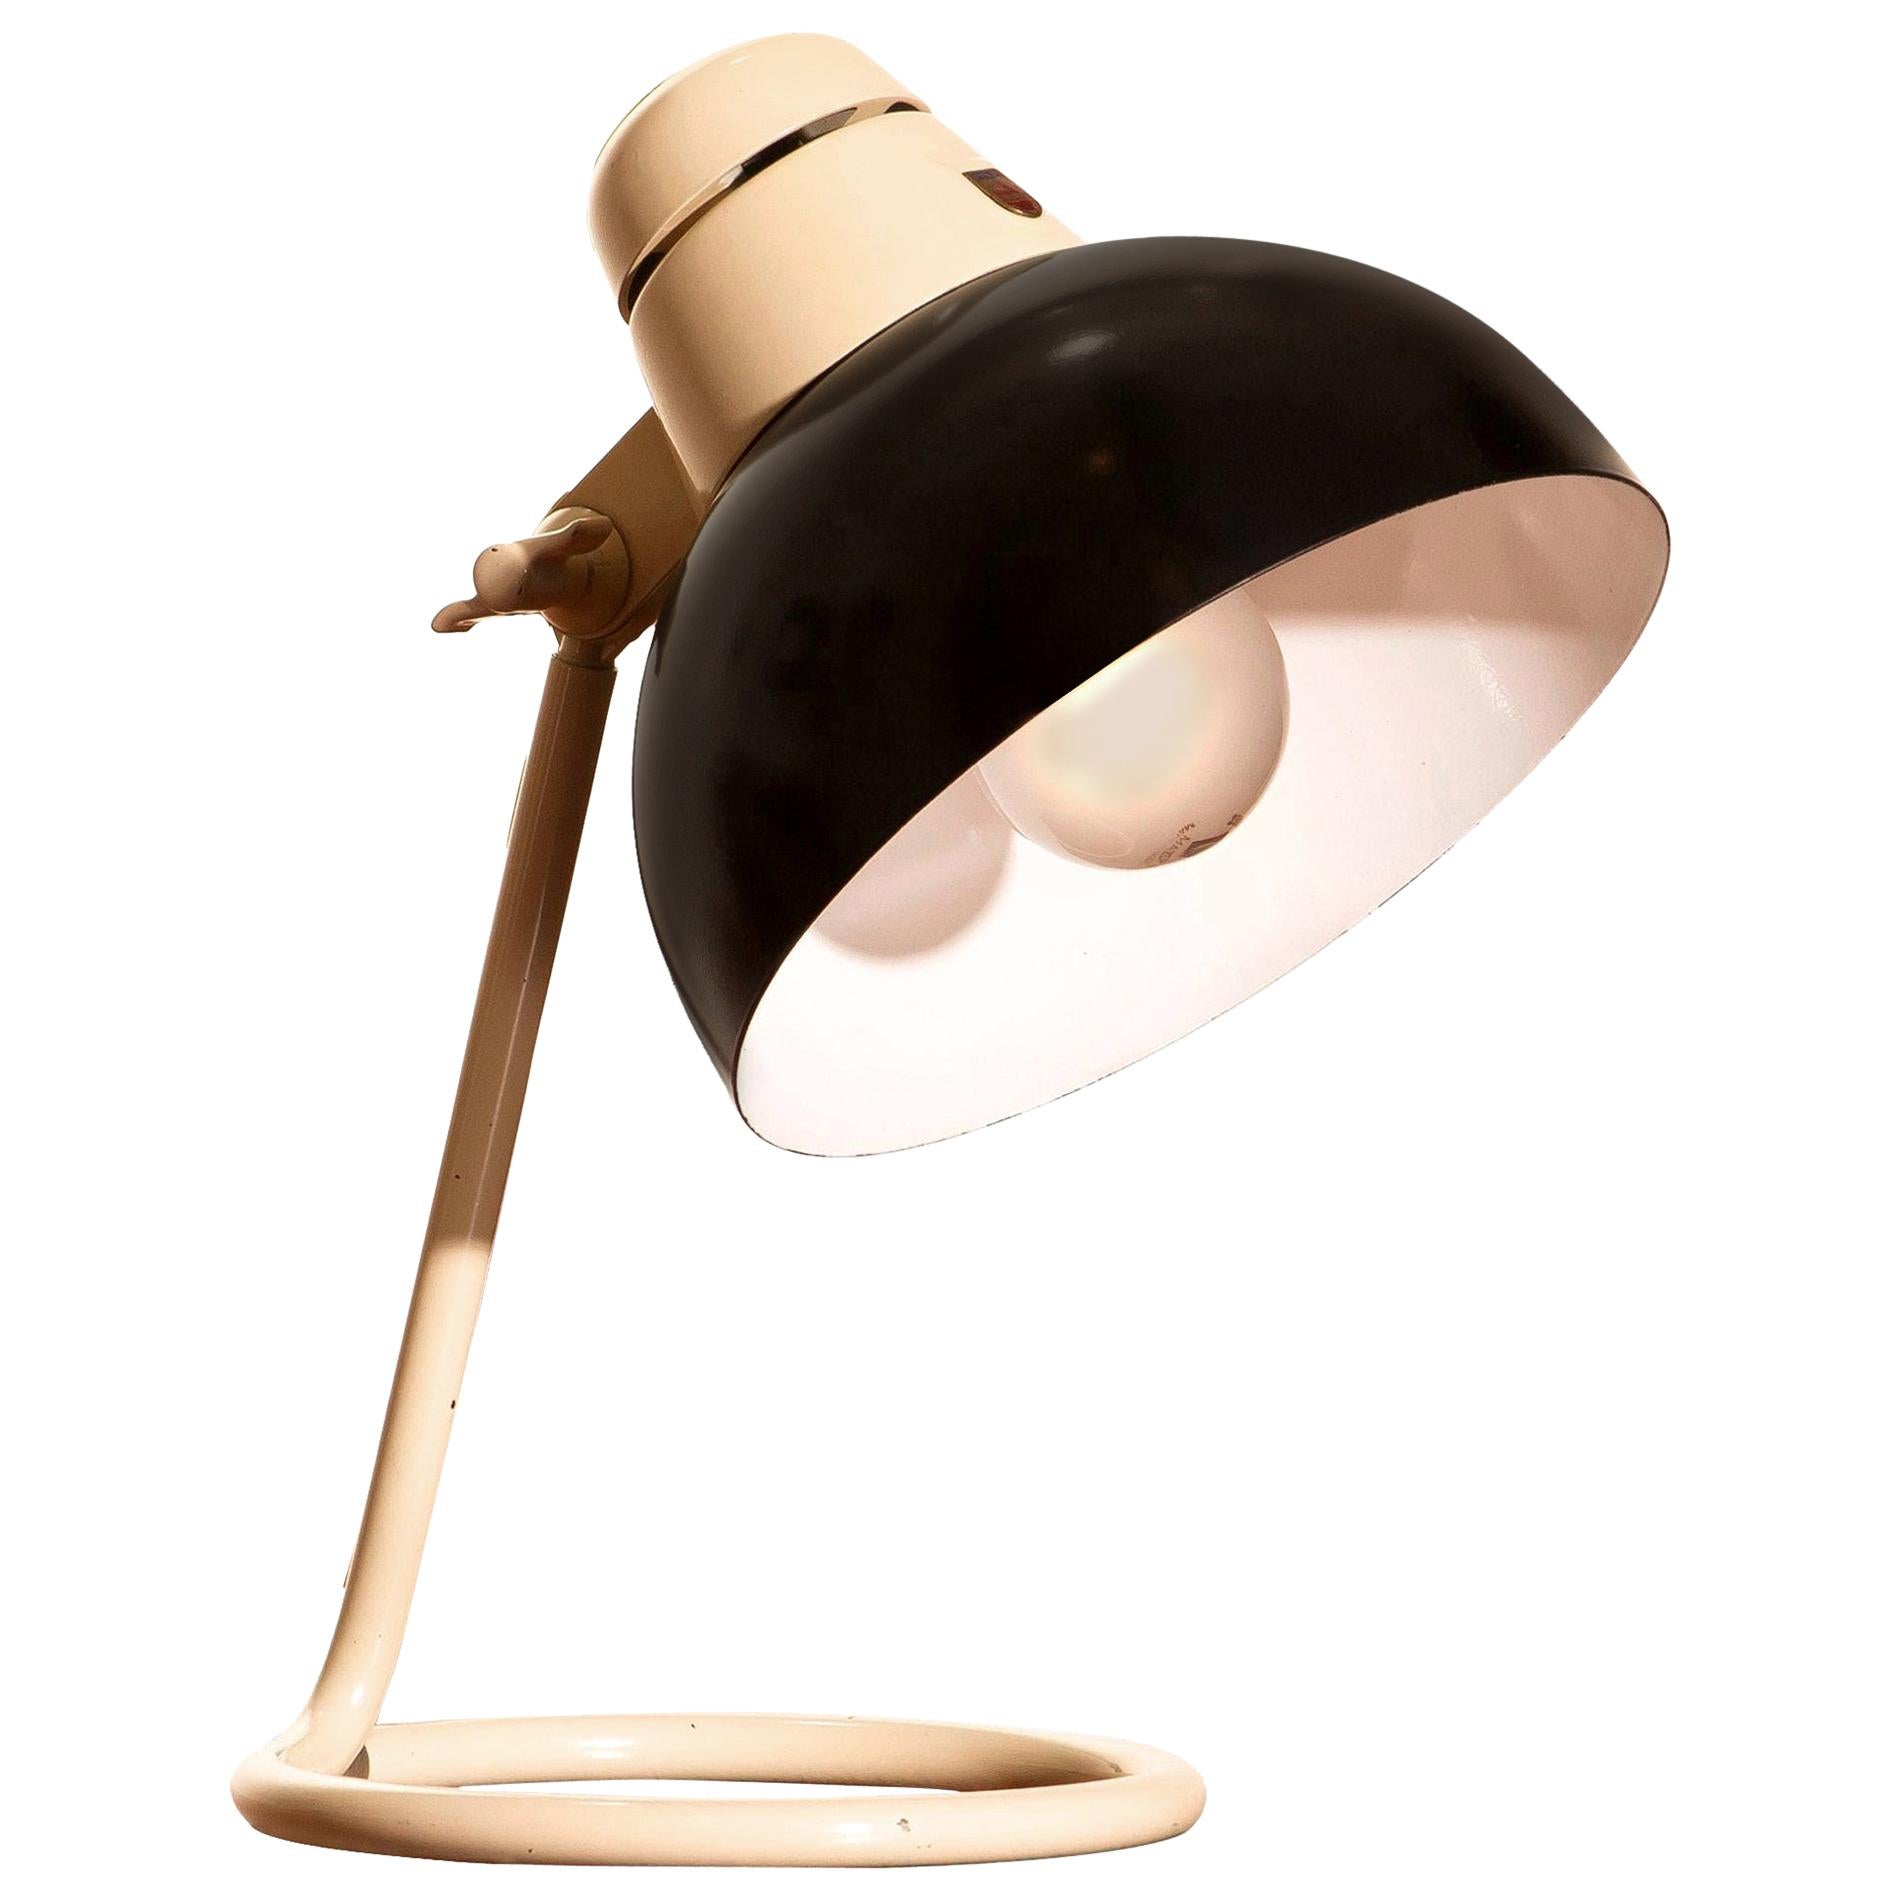 Beautiful desk or table lamp in off-white and black lacquered metal and in very good condition.

Period: 1950
The dimensions are: Height 33 cm, 13 inch, ø shade 20 cm, 8 inch.